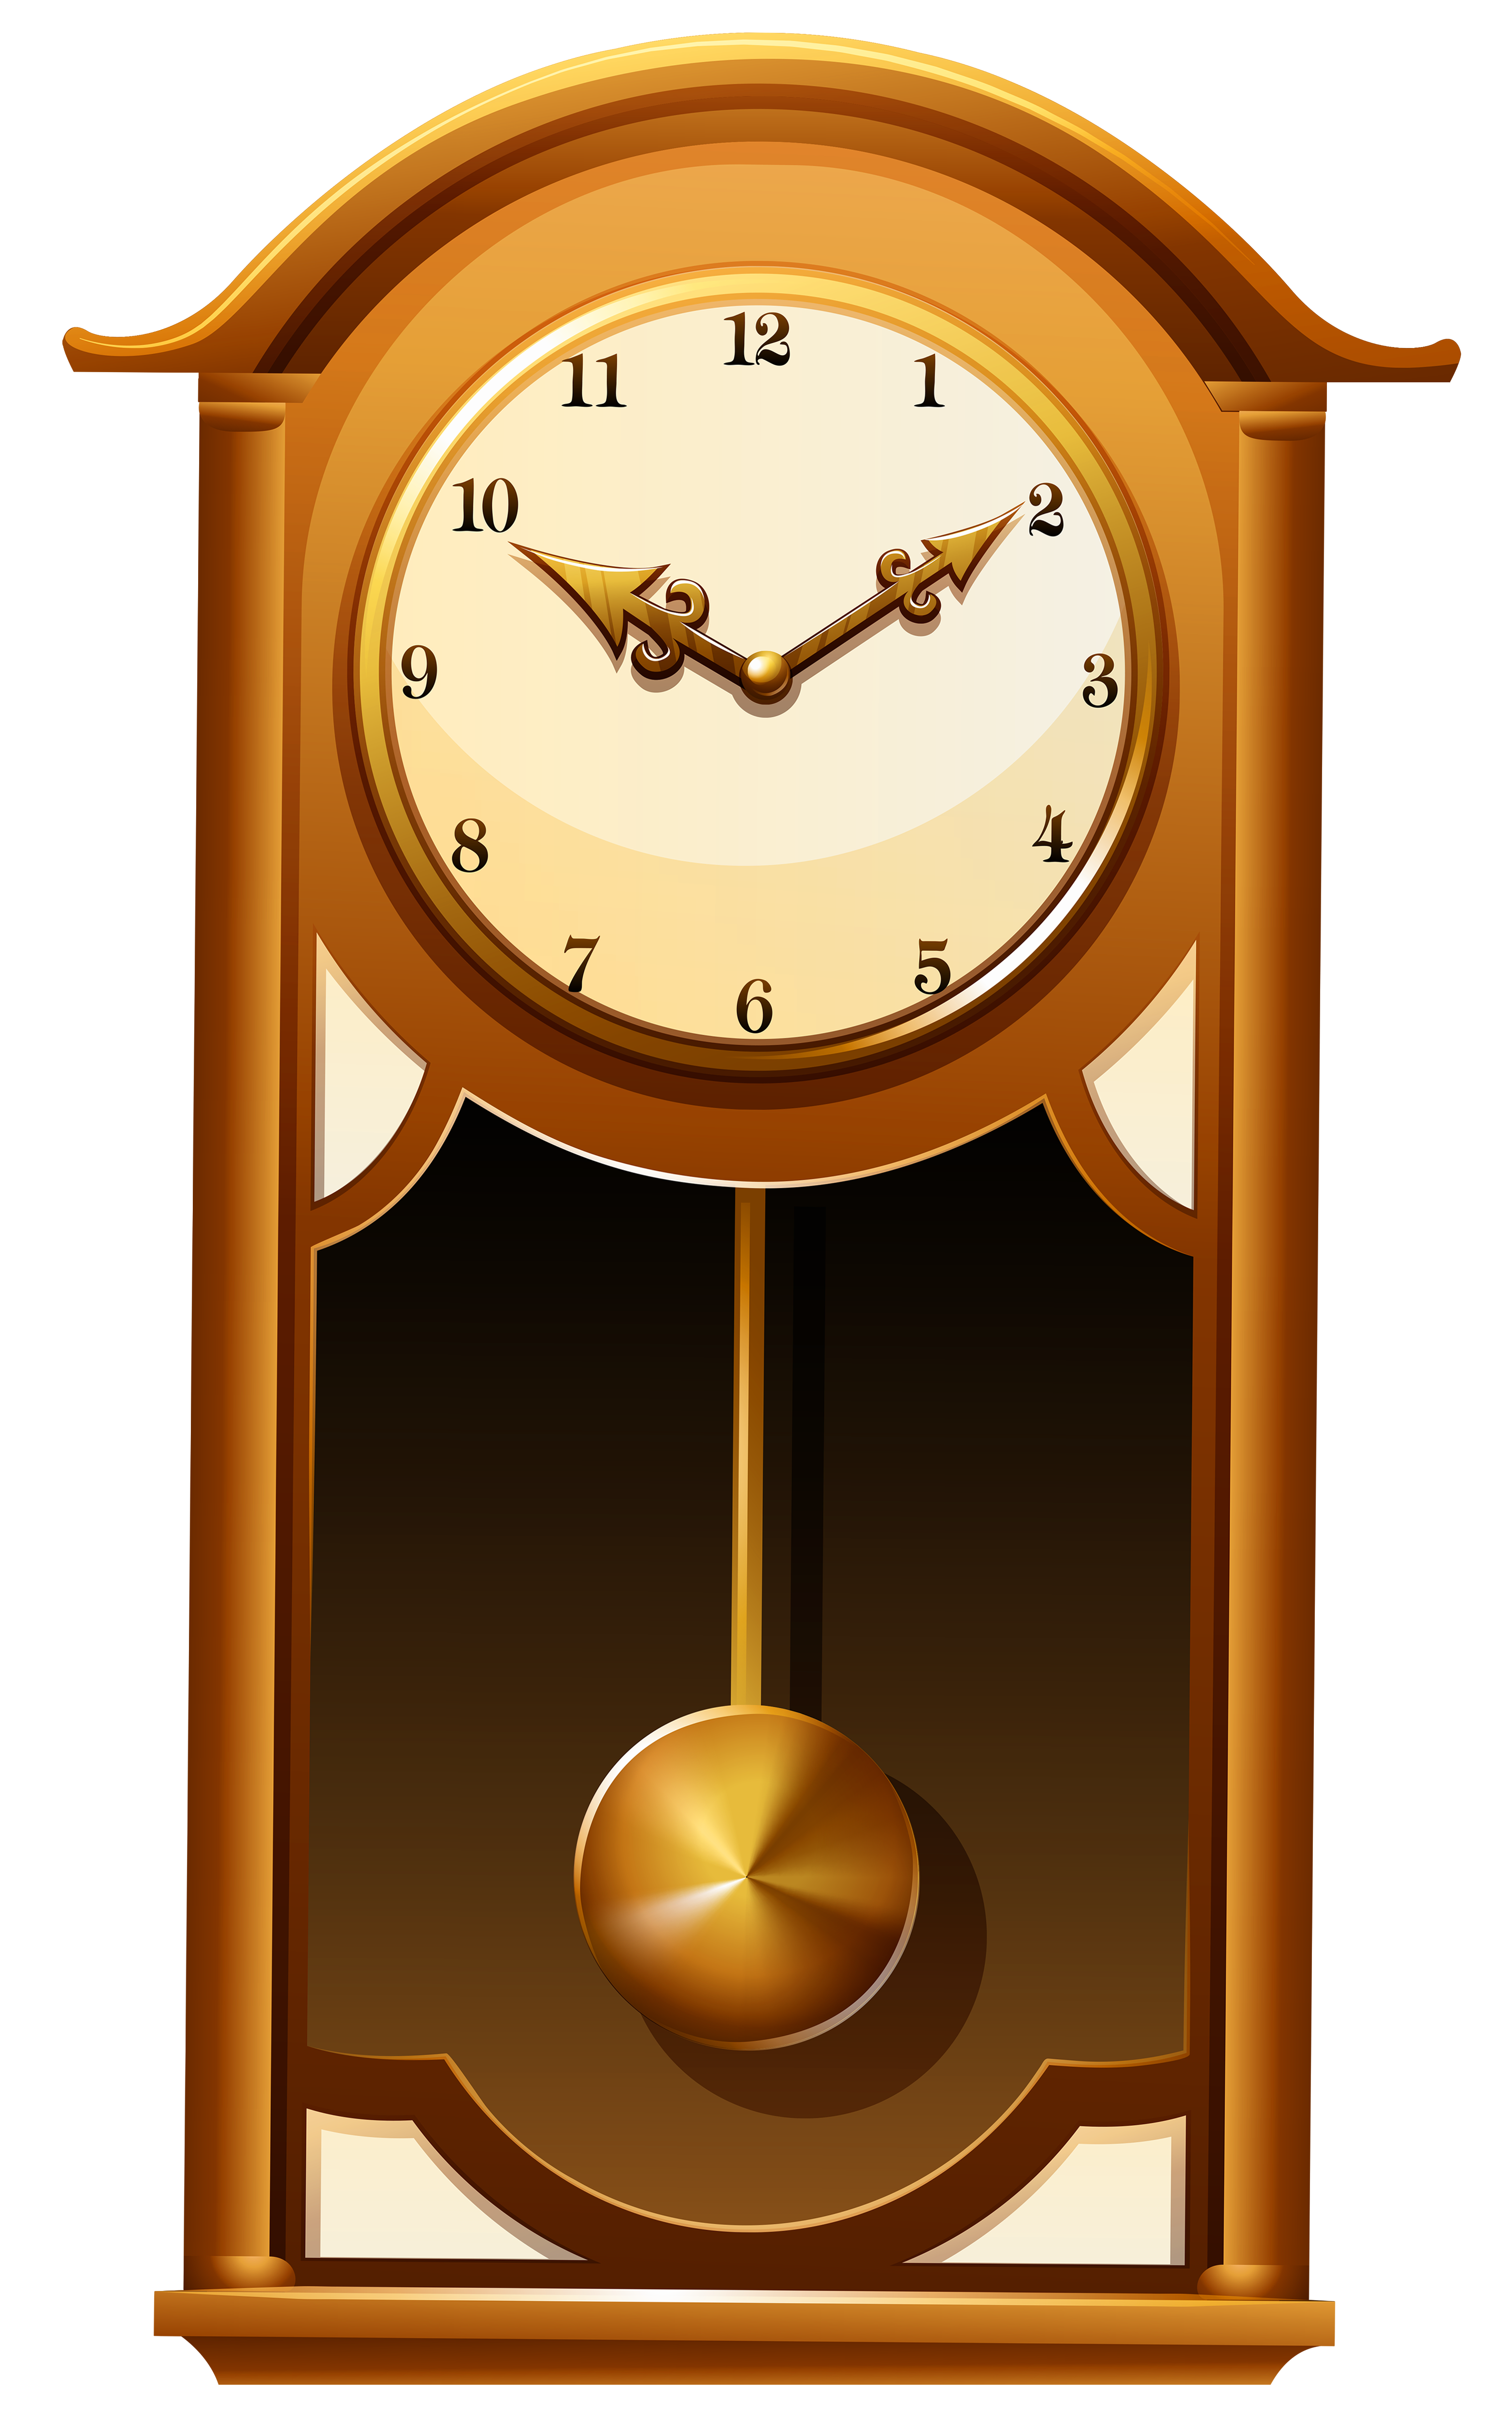 clipart of watches and clocks - photo #44